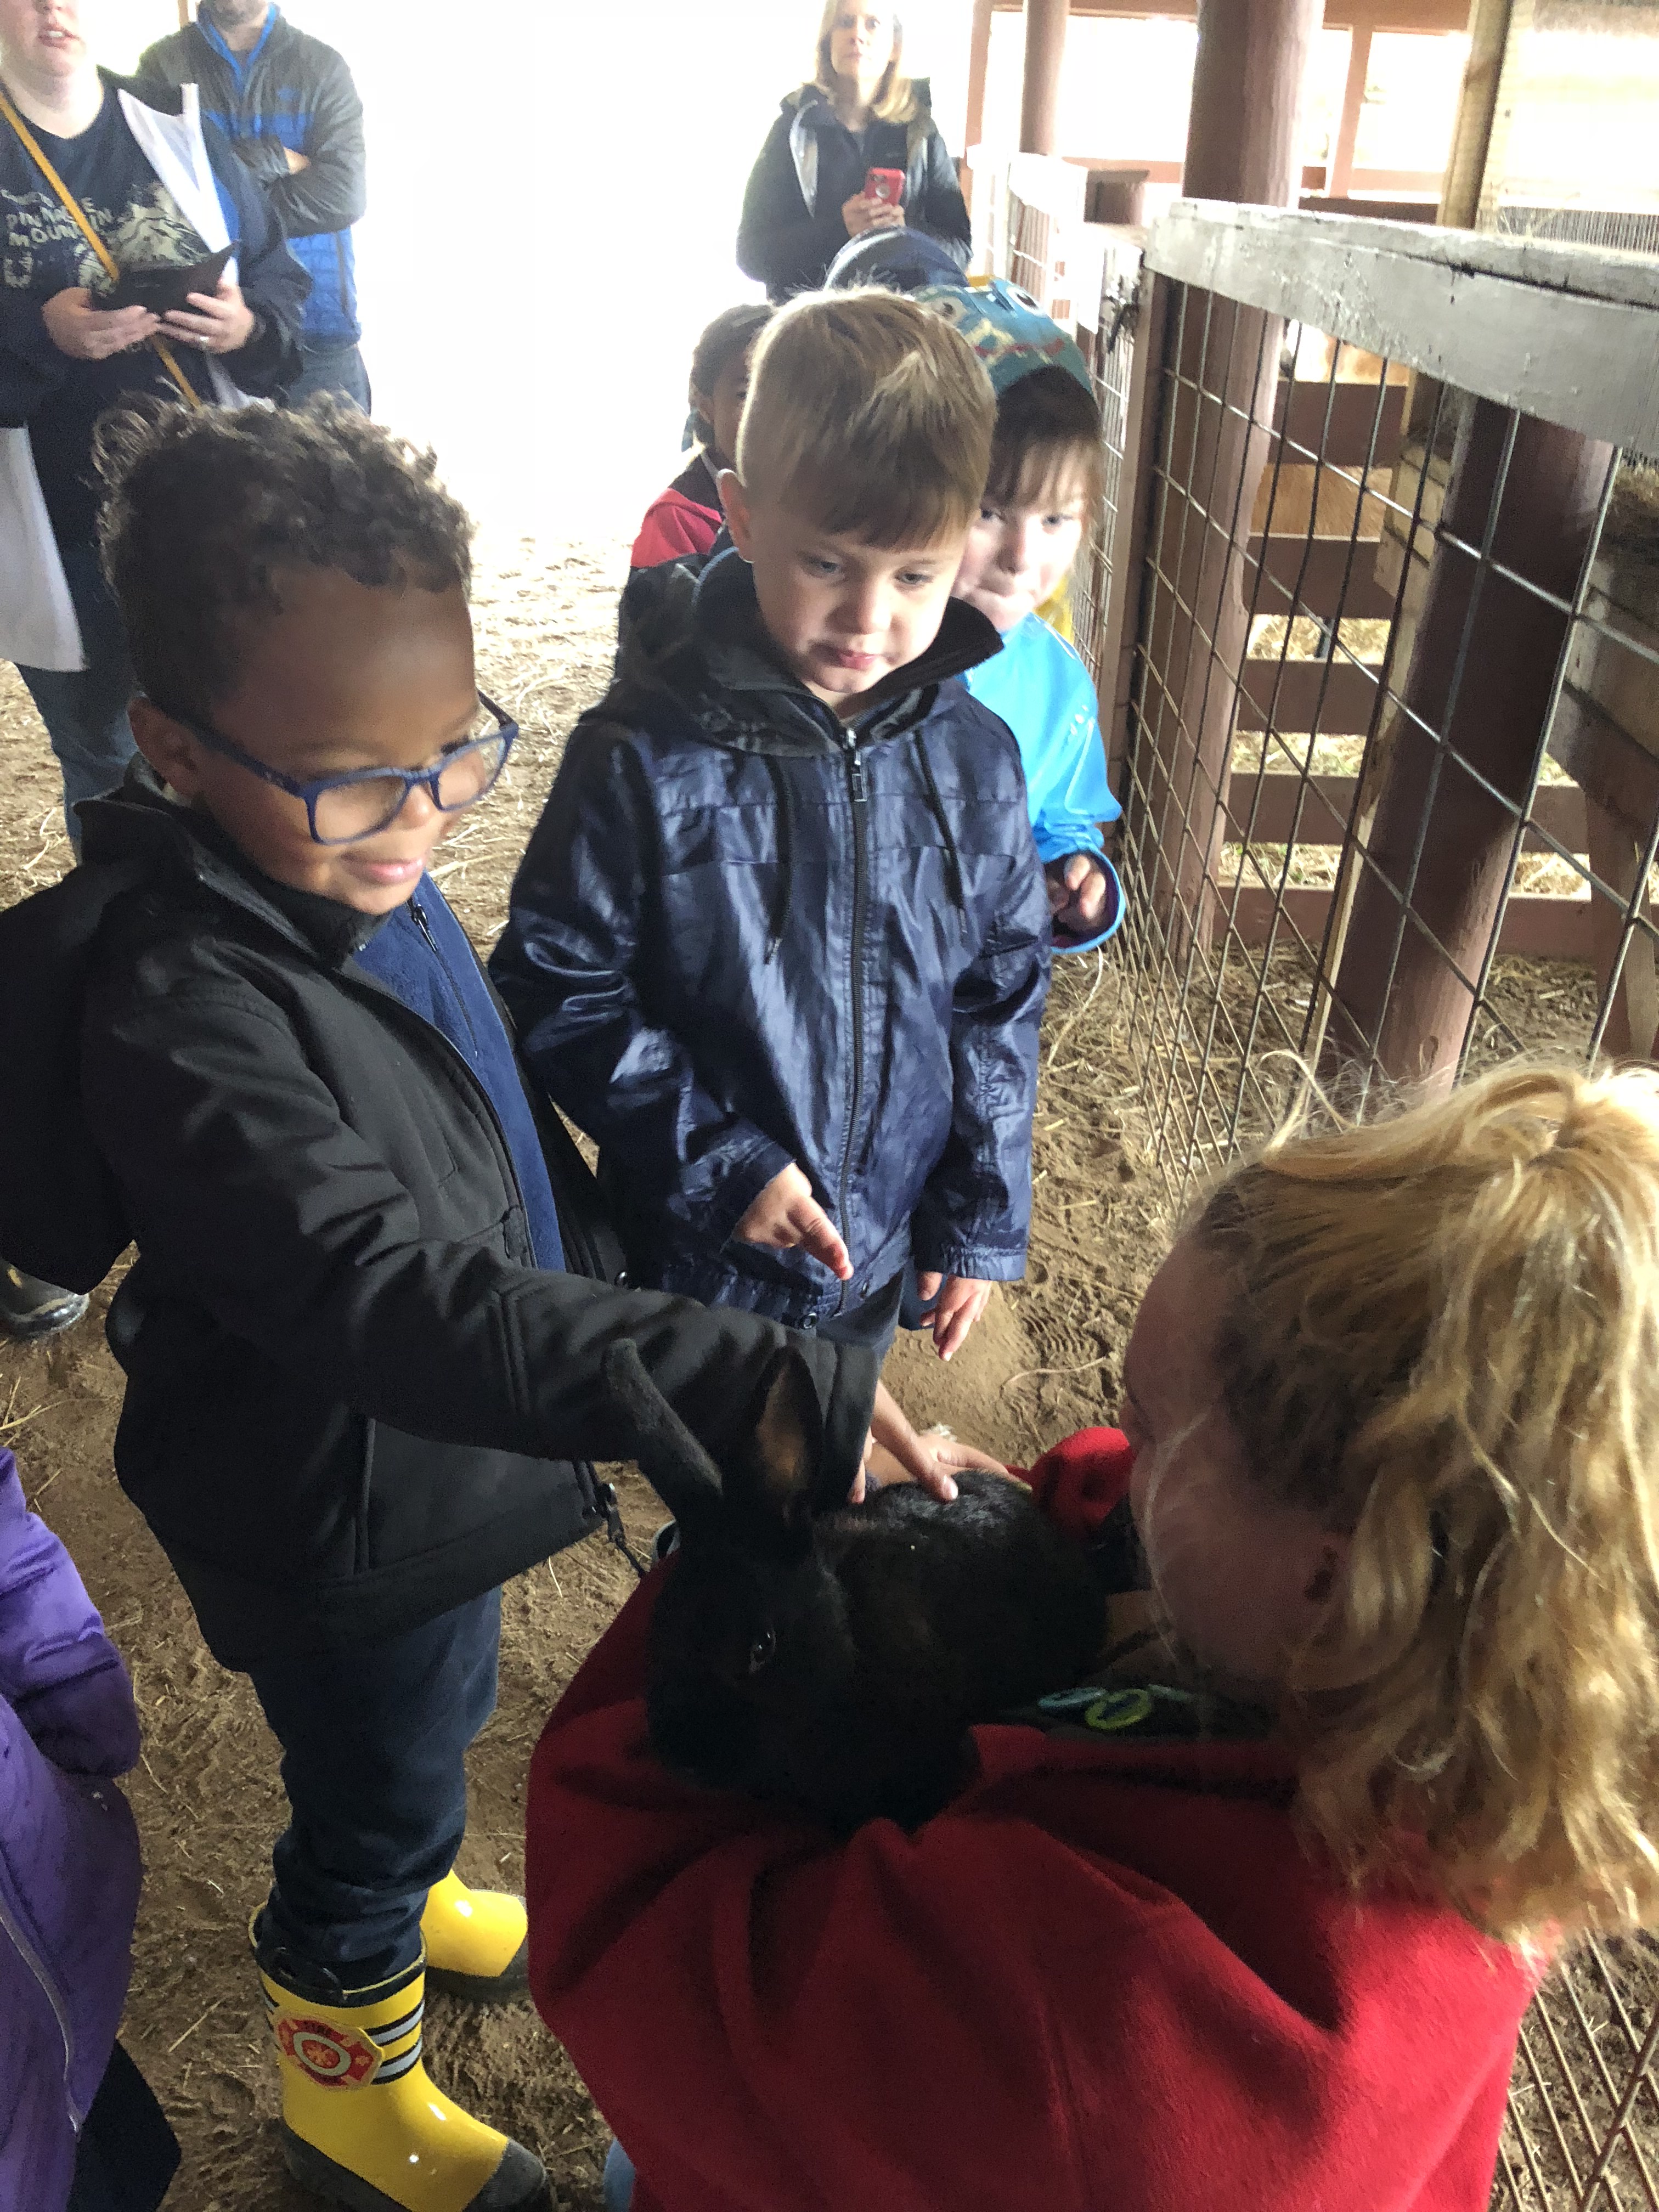 A group of children taking care of a small black bunny